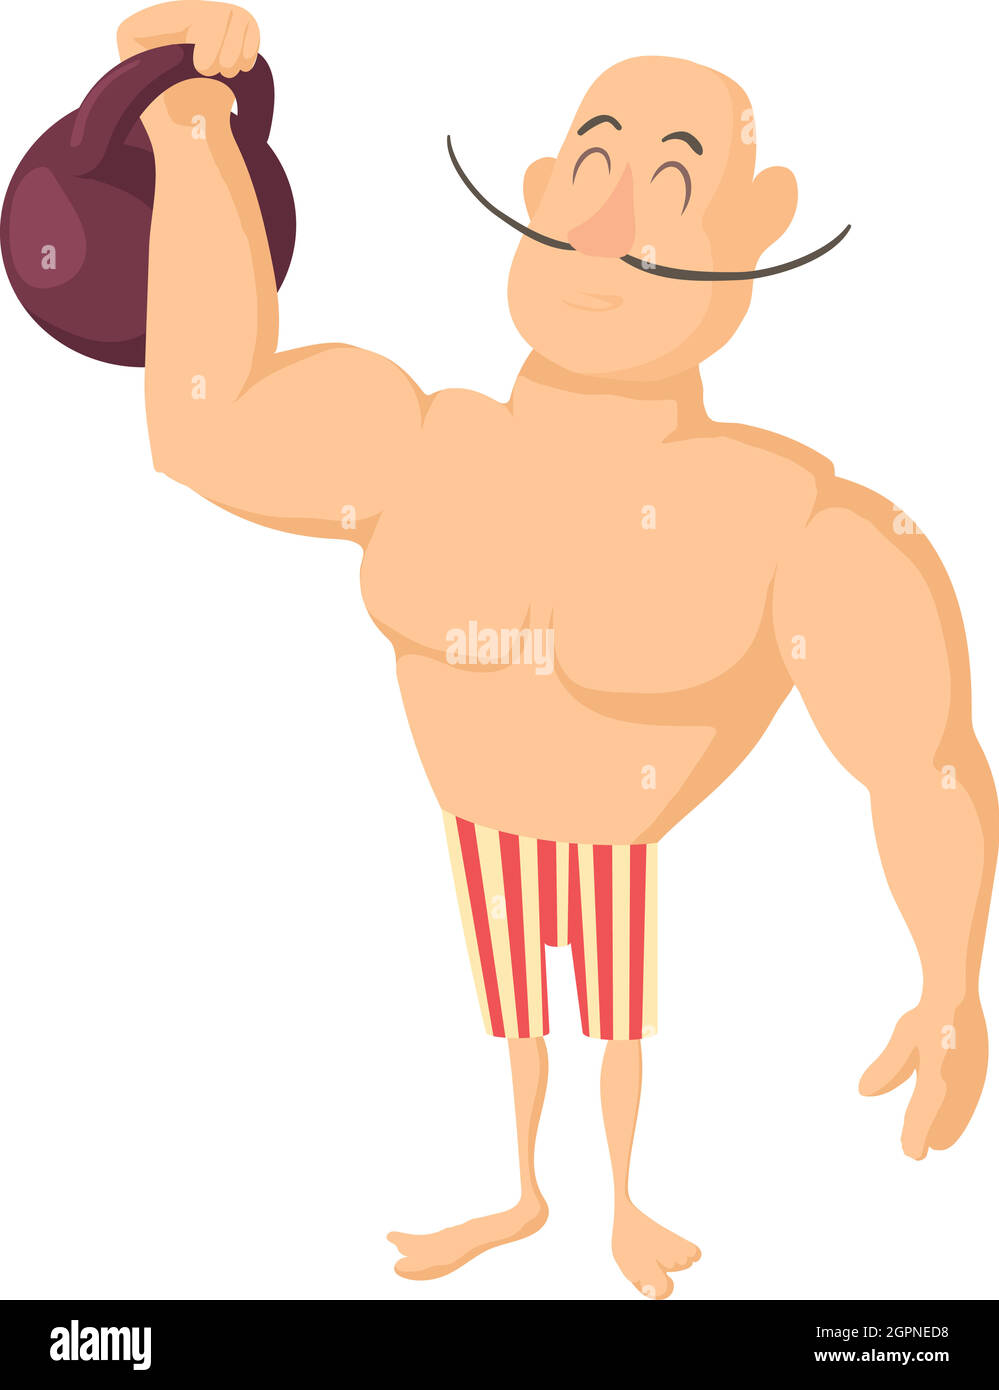 Young strong man athlete character Royalty Free Vector Image